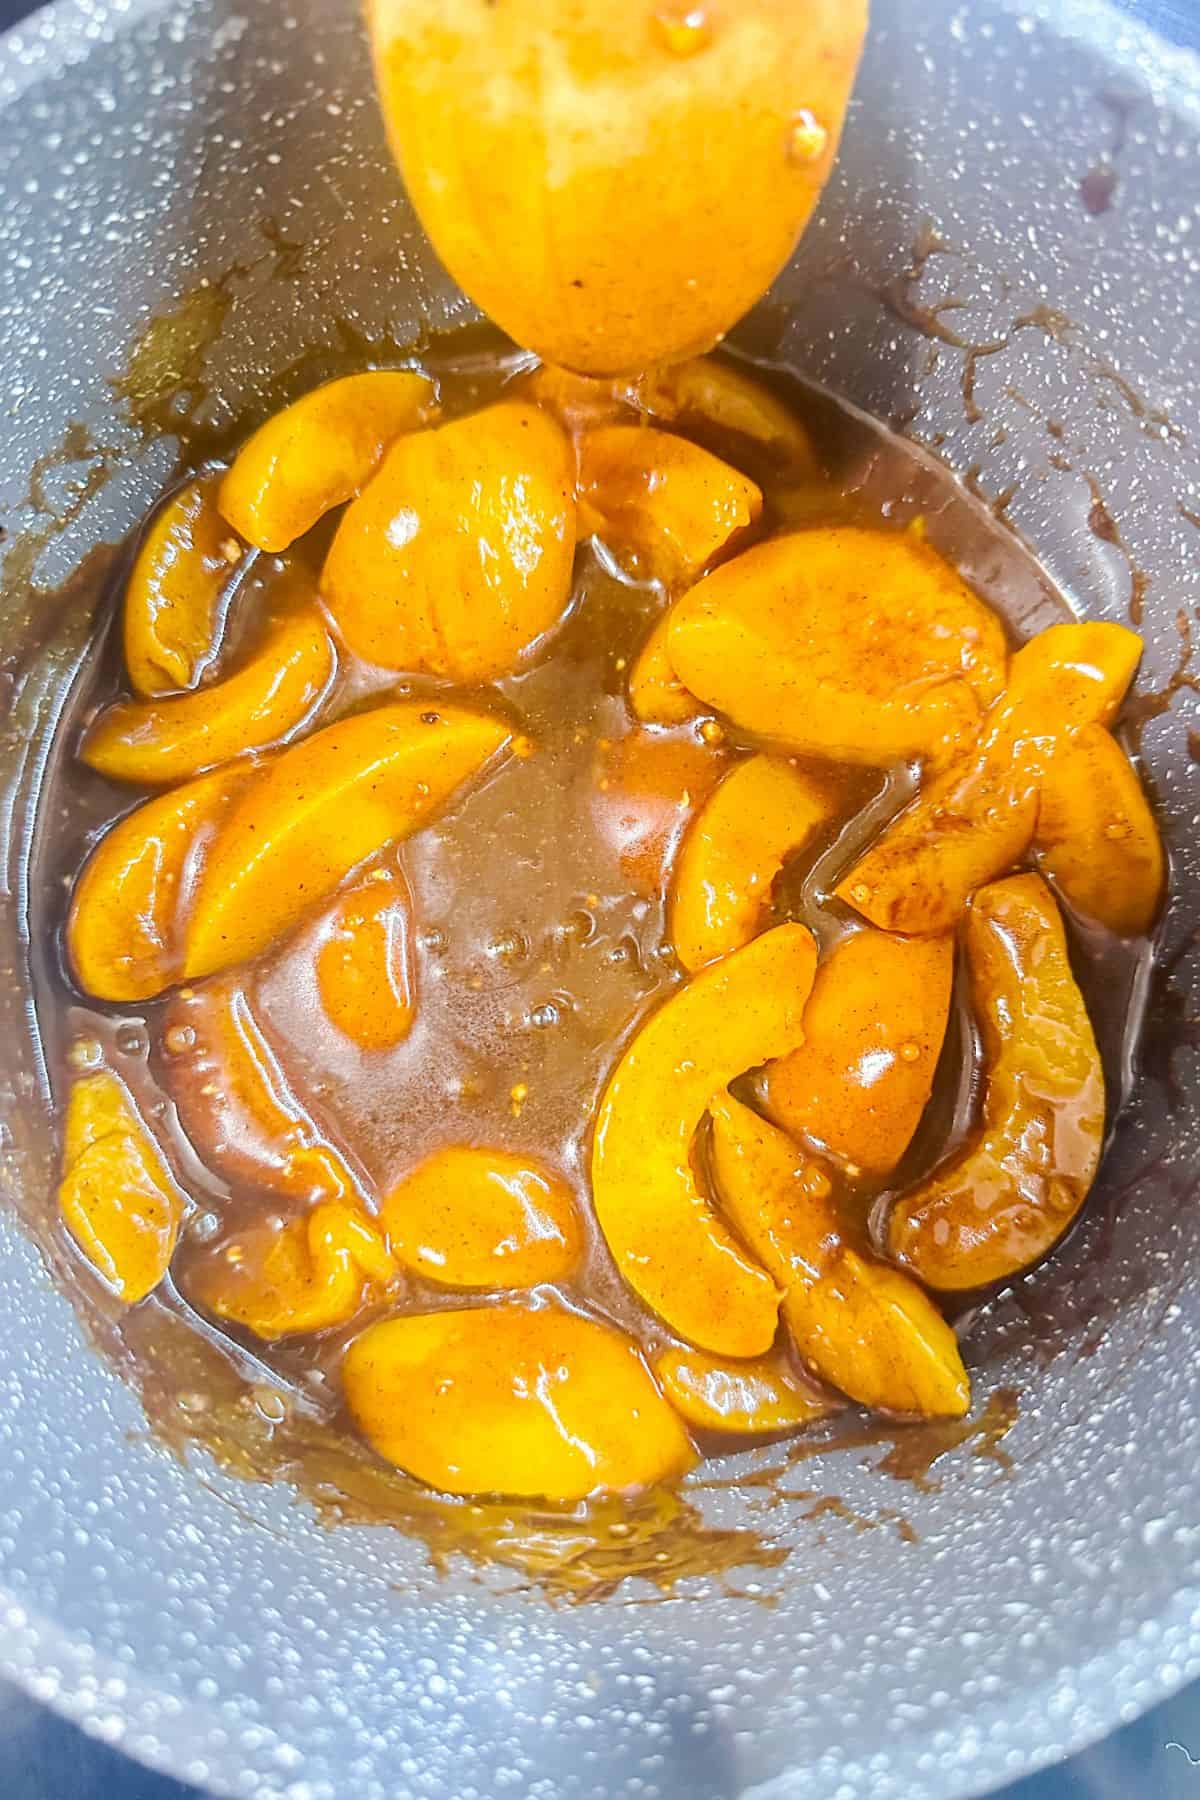 Bright, sliced peaches in a saucepan coated with a glossy, cinnamon-infused sauce